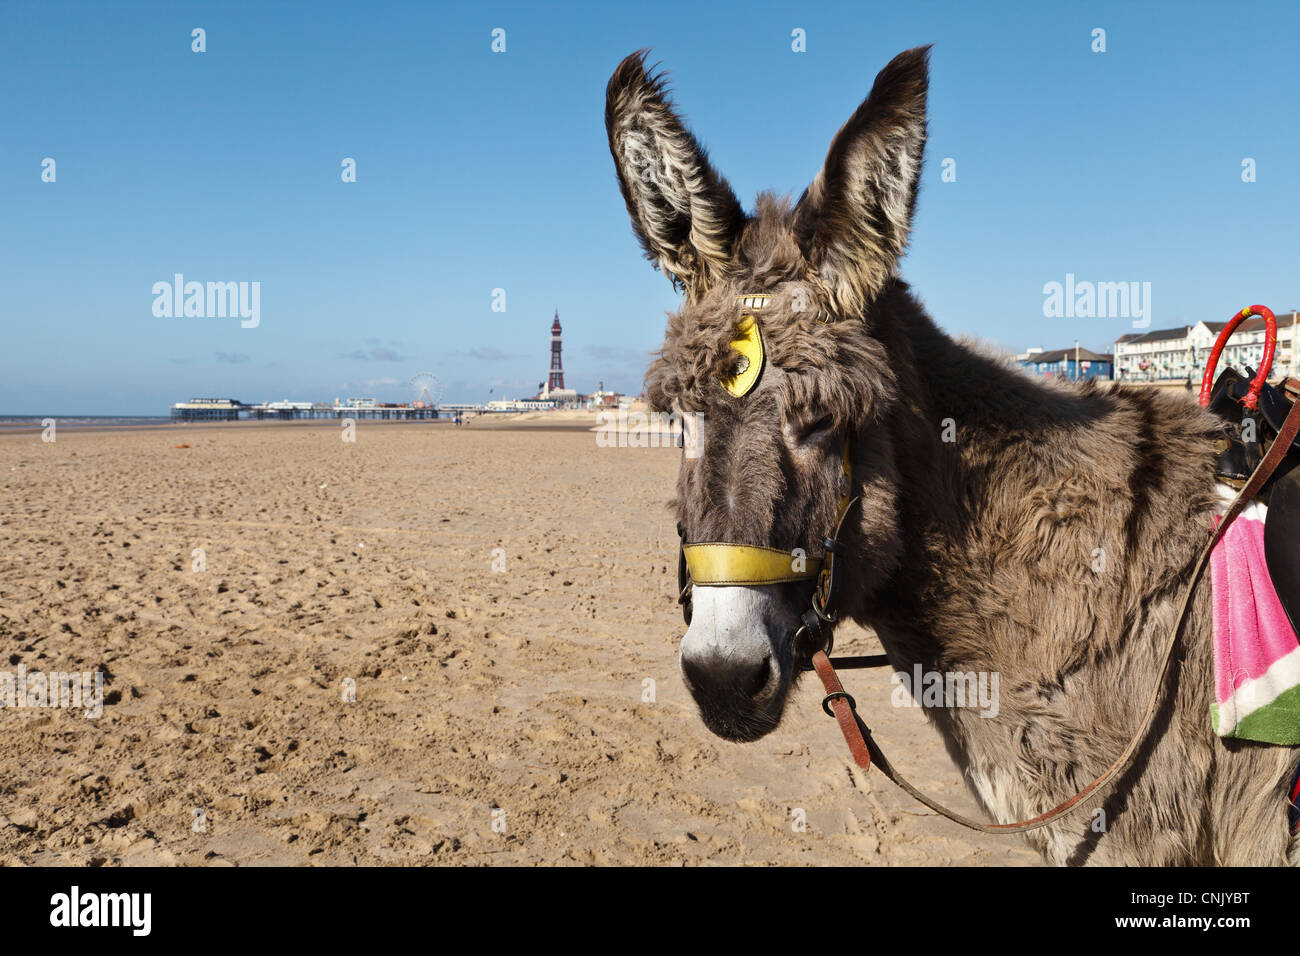 Donkey waiting for a rider on Blackpool Beach. Stock Photo